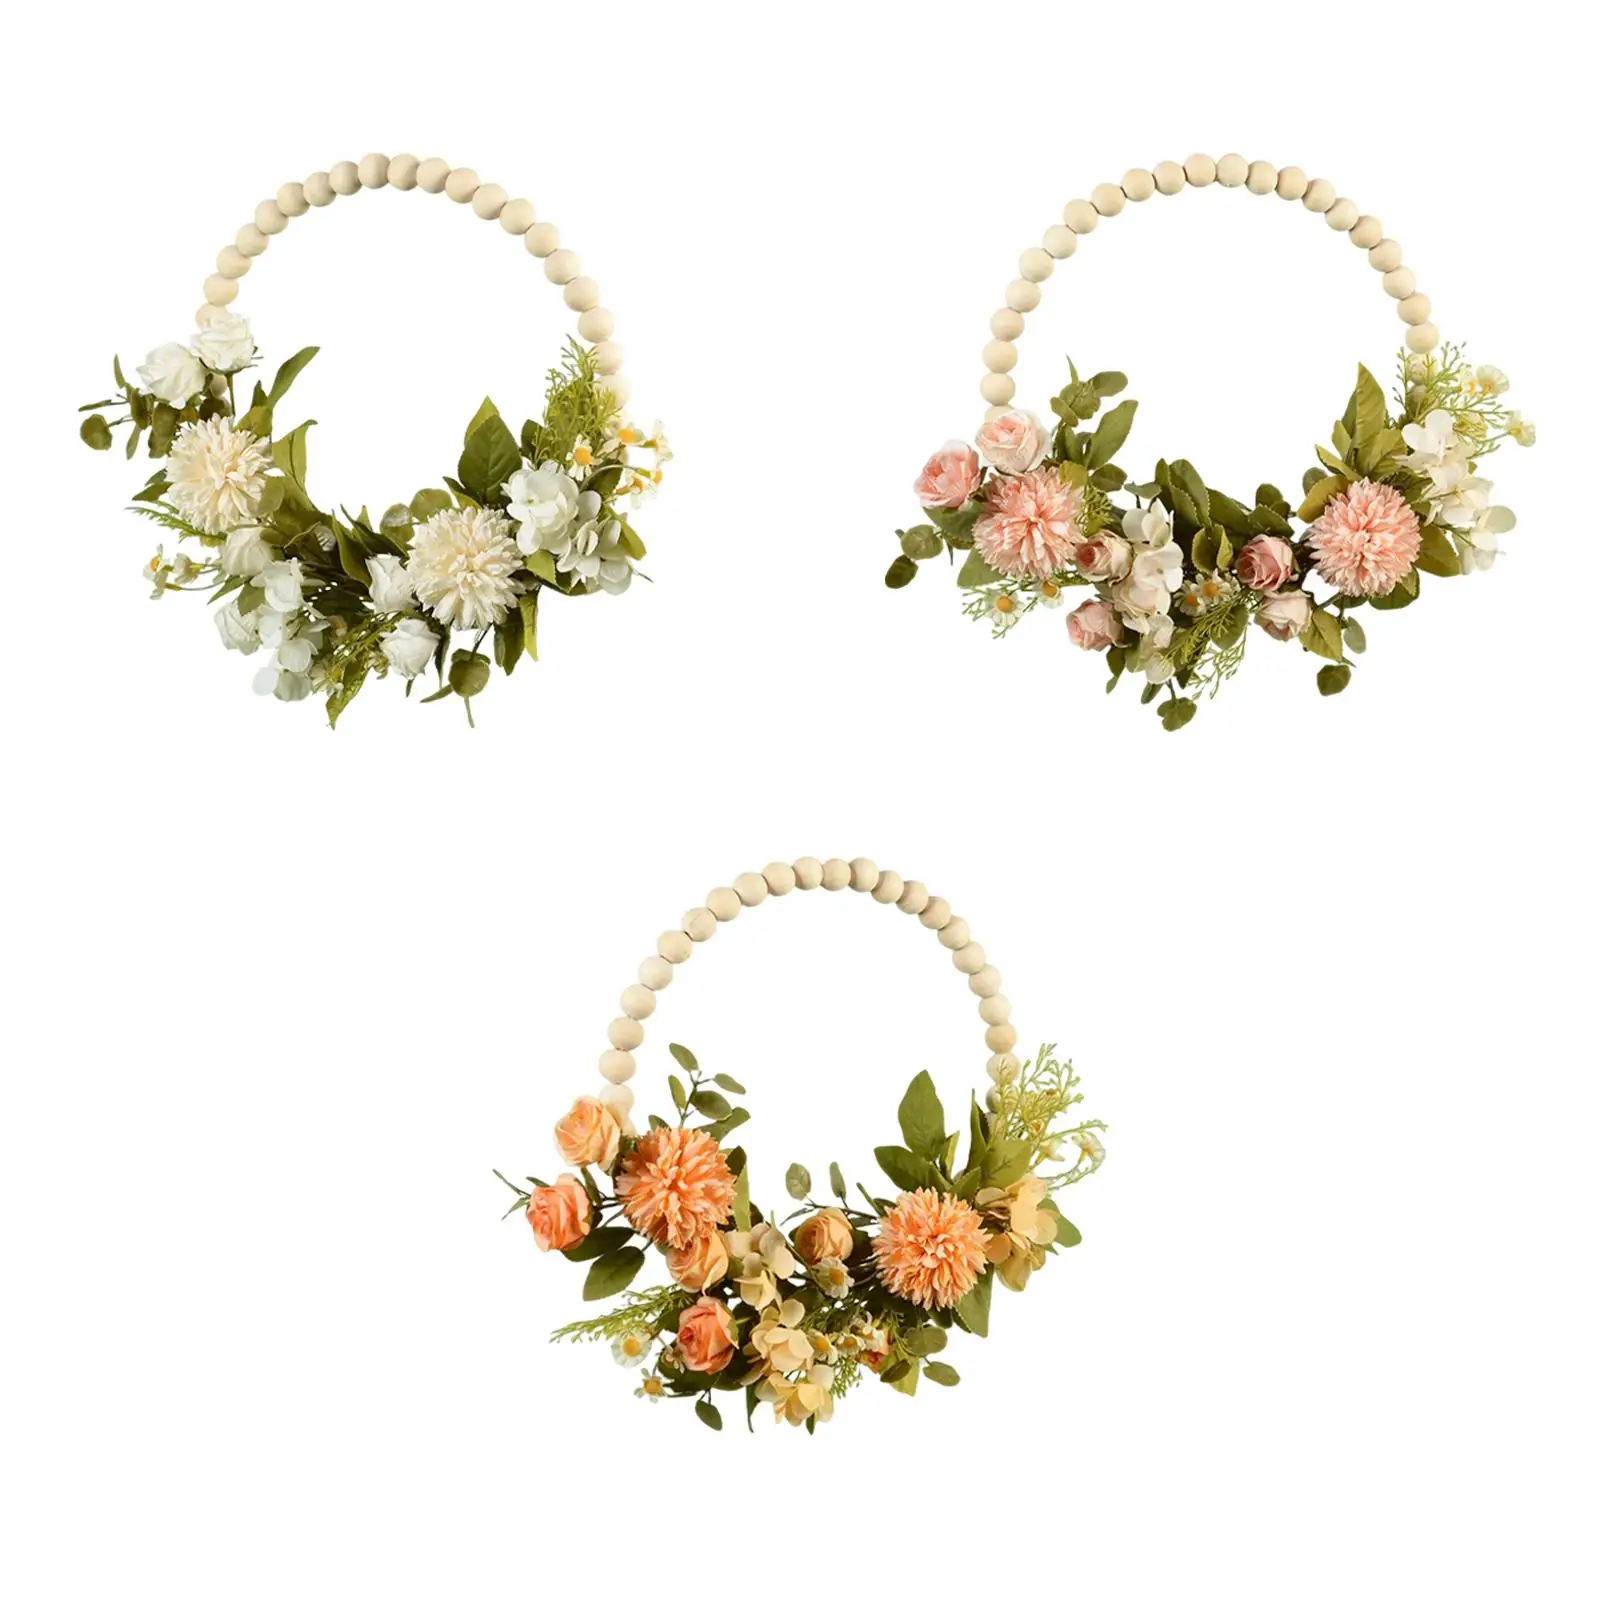 Artificial Flower Wreath Door Garland Wooden Beads Hoop Wall Hanging Greenery Leaves for Backdrop Farmhouse Party Outdoor Decor